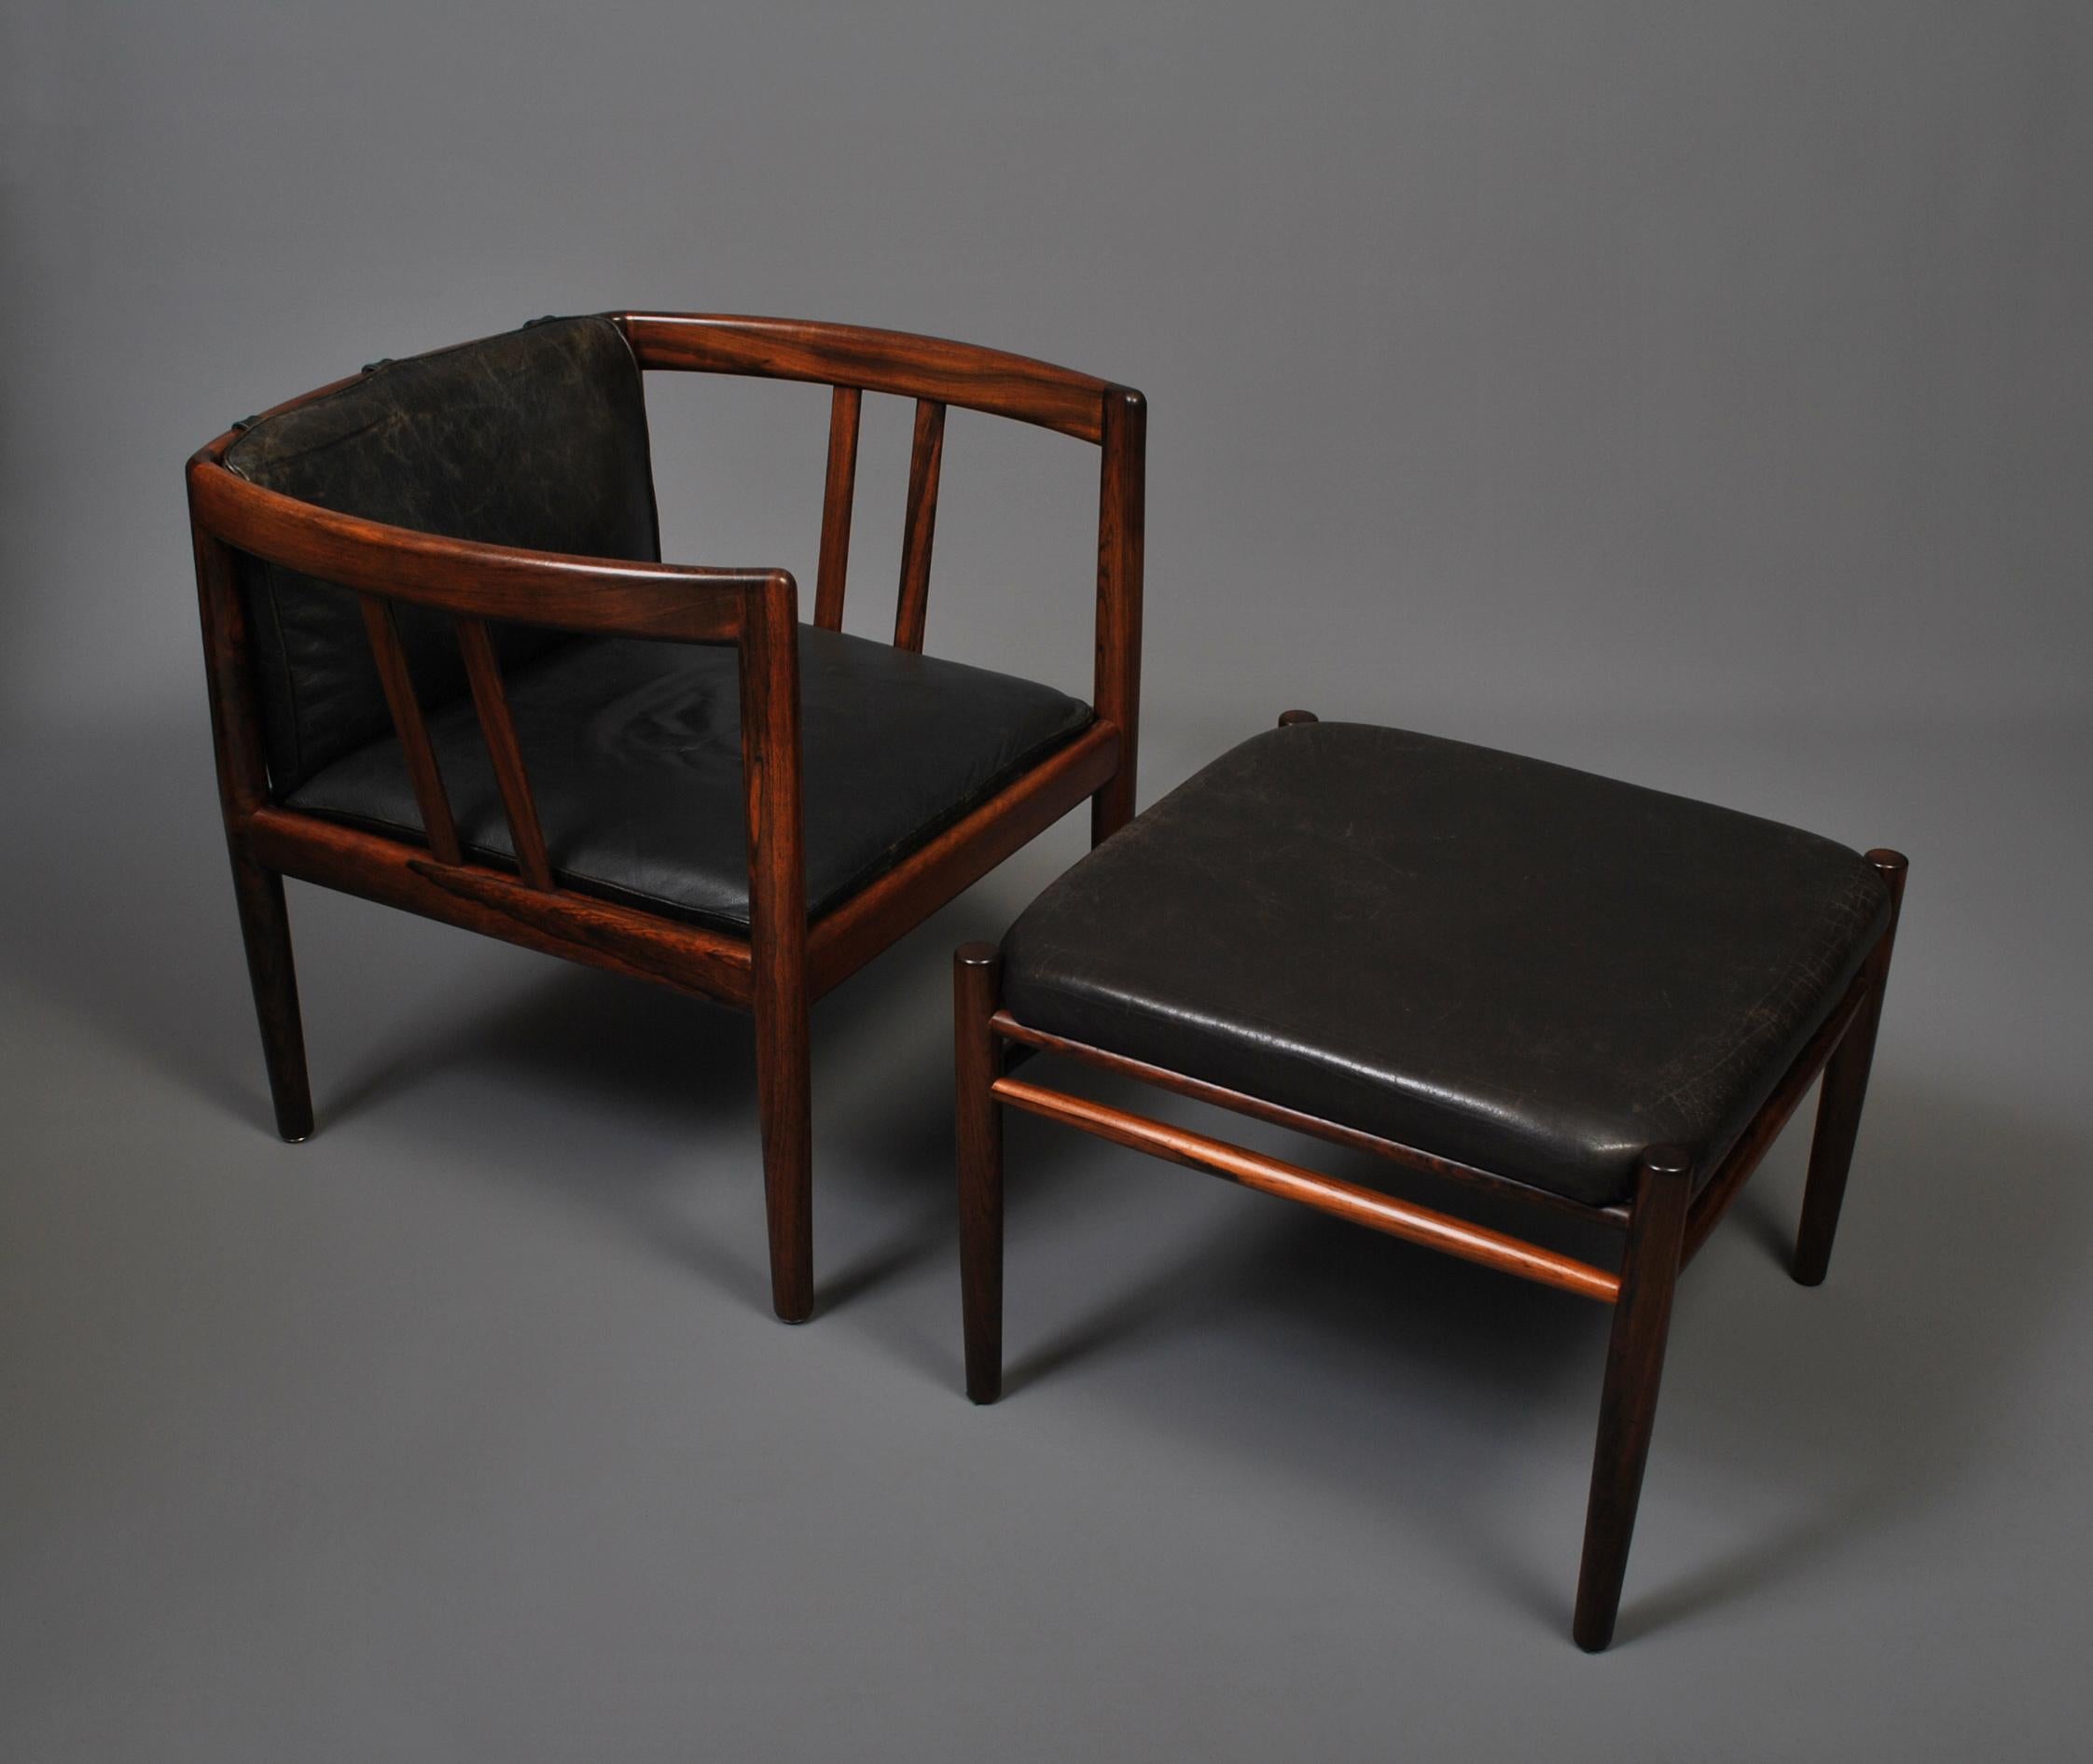 A very rare Danish midcentury chair and ottoman by Illum Wikkeslo and Holger Christiansen. Denmark 1960. Outstanding quality.
Original leather. We can reupholster if required. 

Illum Wikkelsø was trained as a cabinetmaker in 1938, and graduated